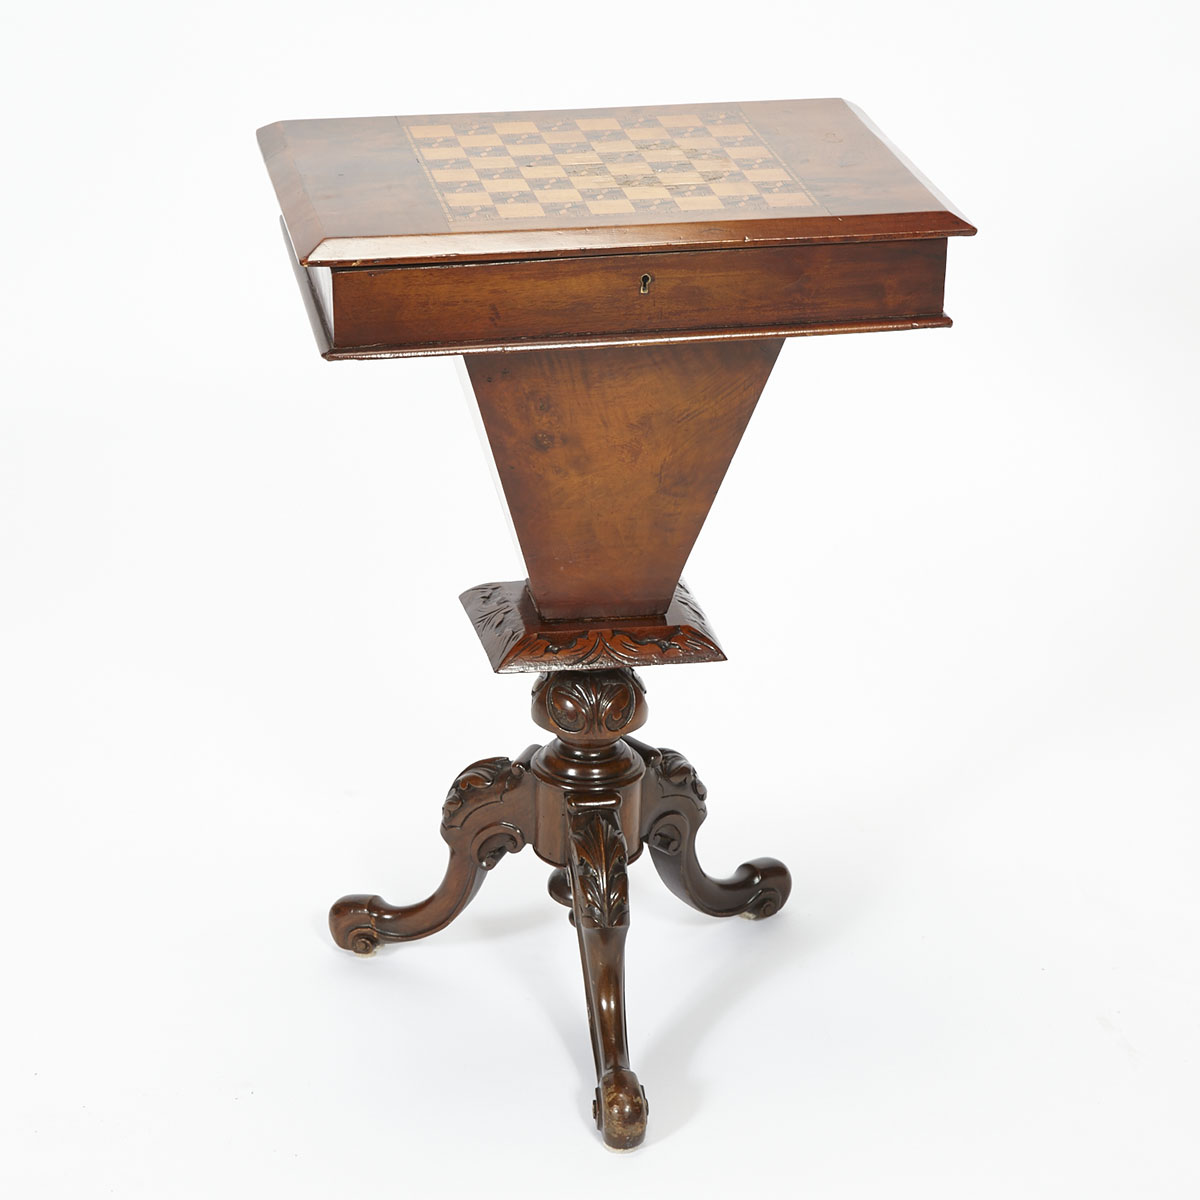 Early Victorian Mahogany Work Table, mid 19th cetury